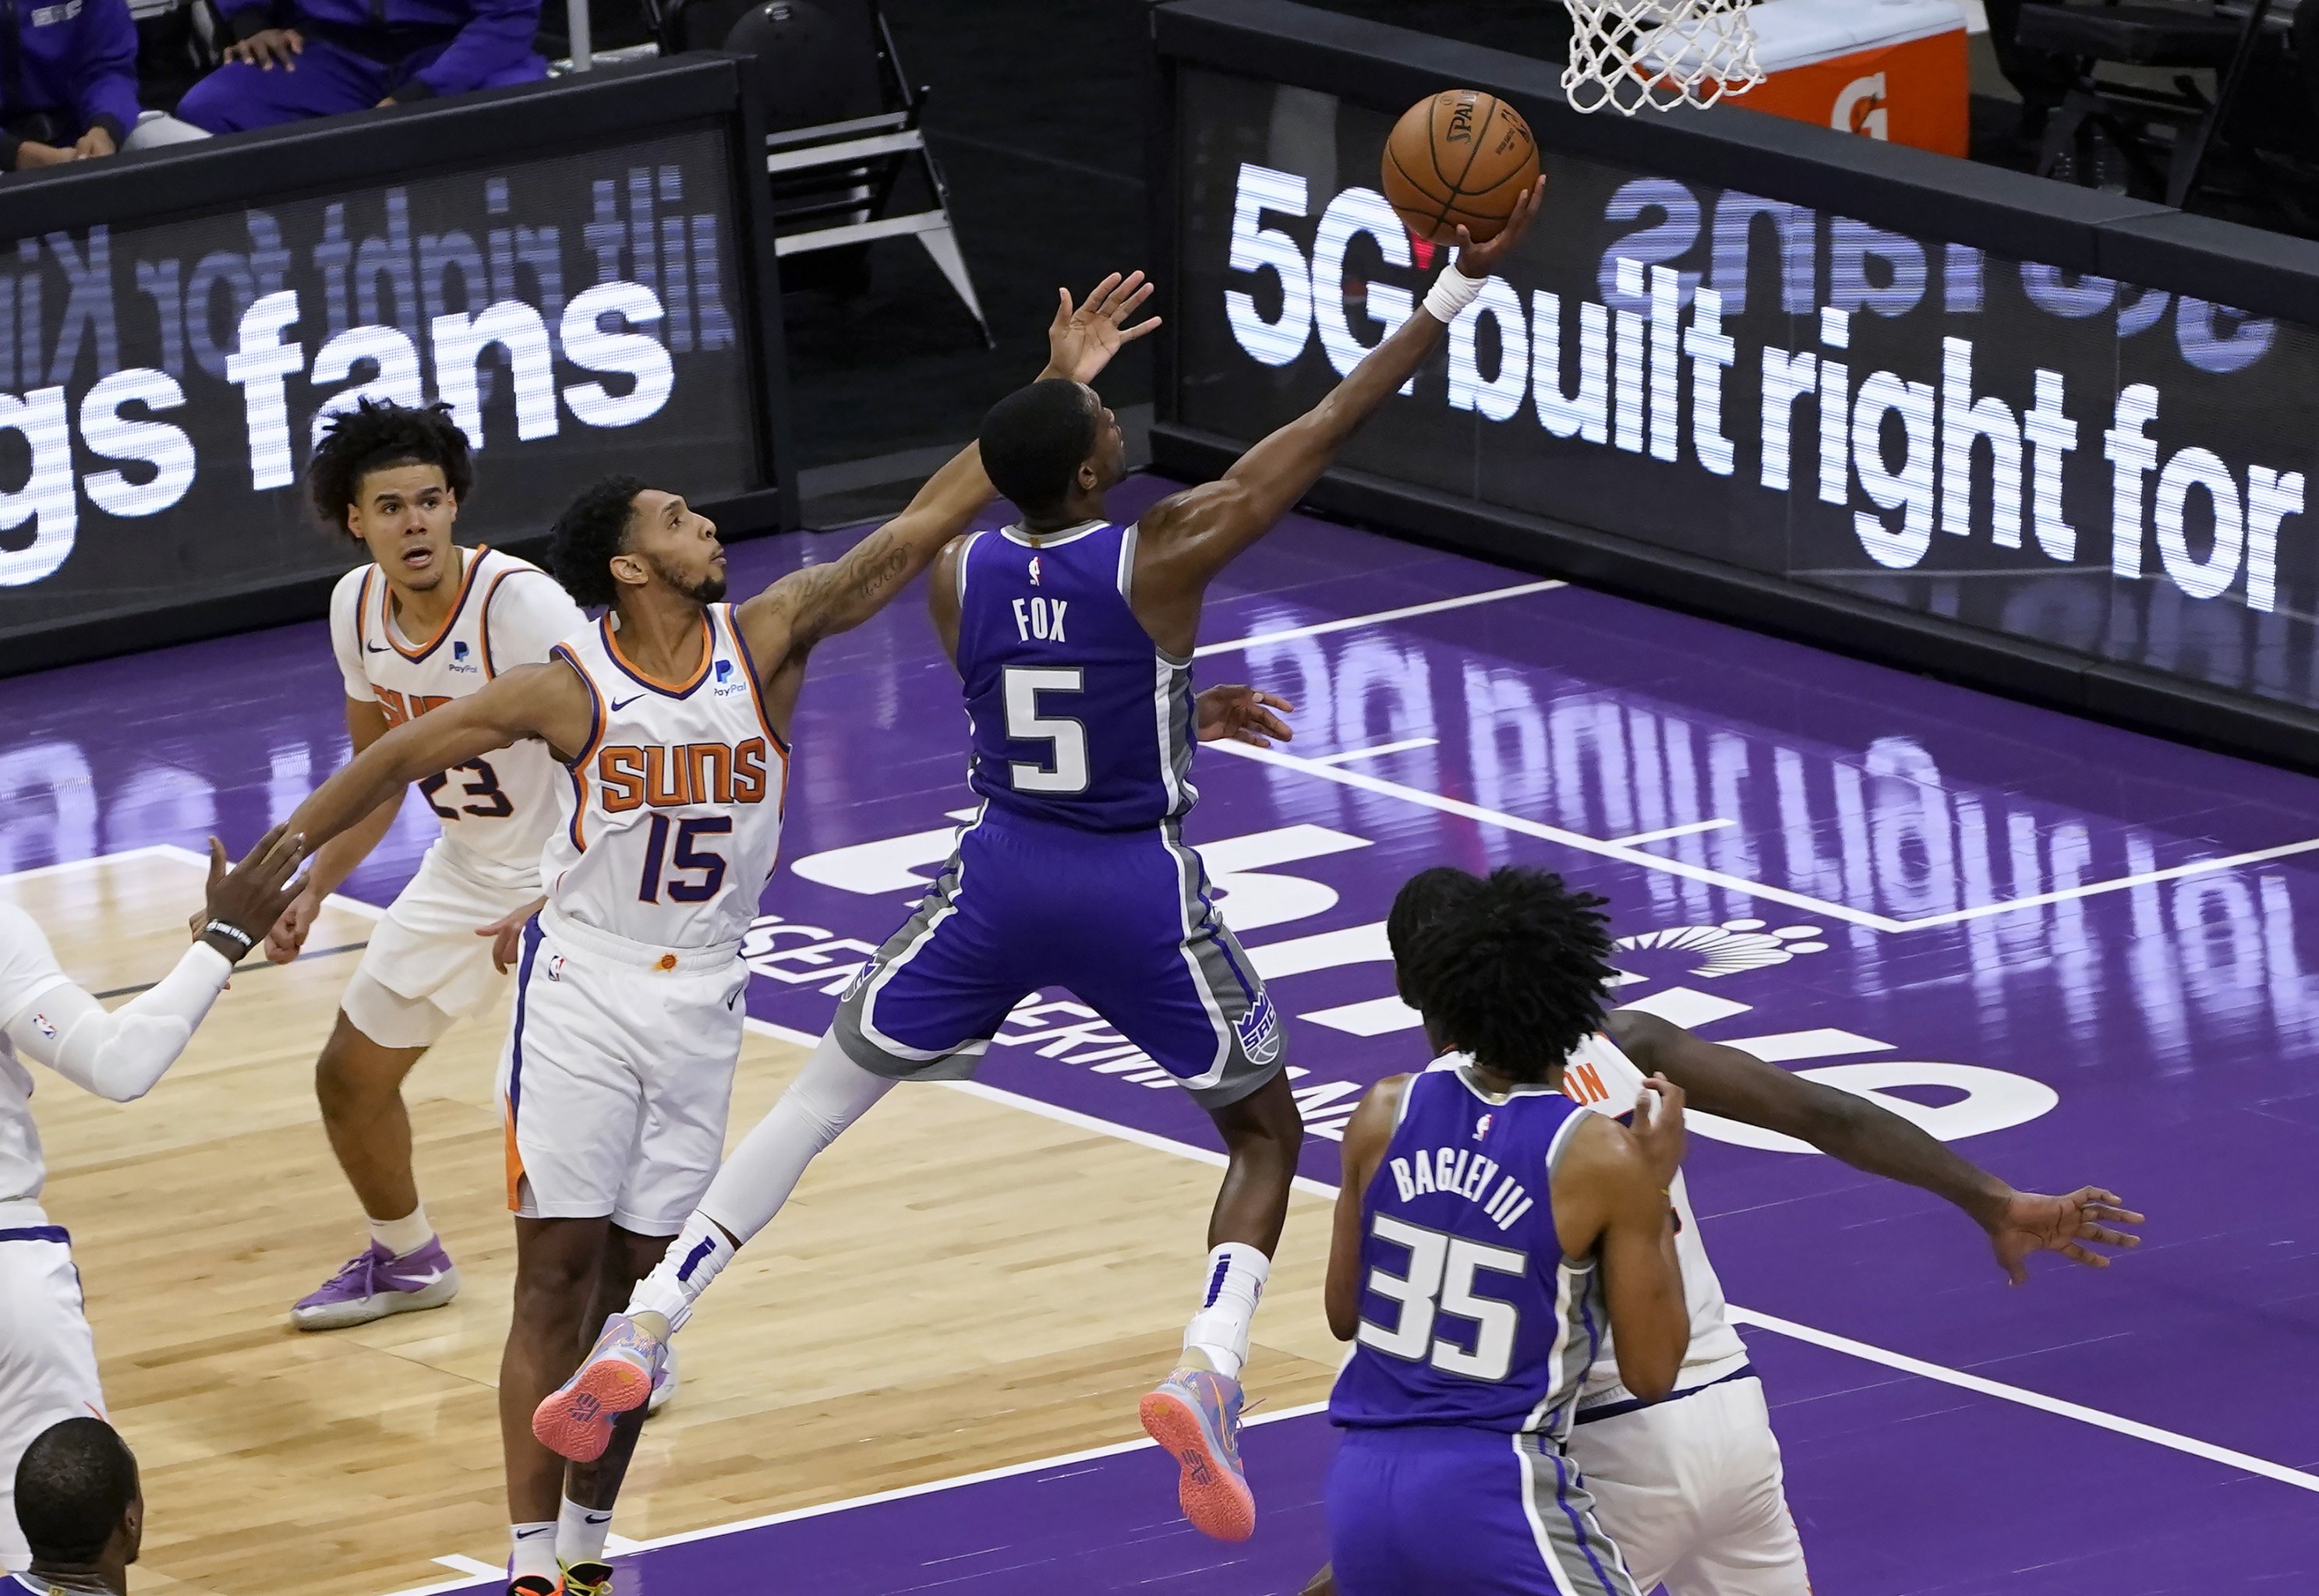 Suns rookie Marquese Chriss out to prove he's more than just a dunker